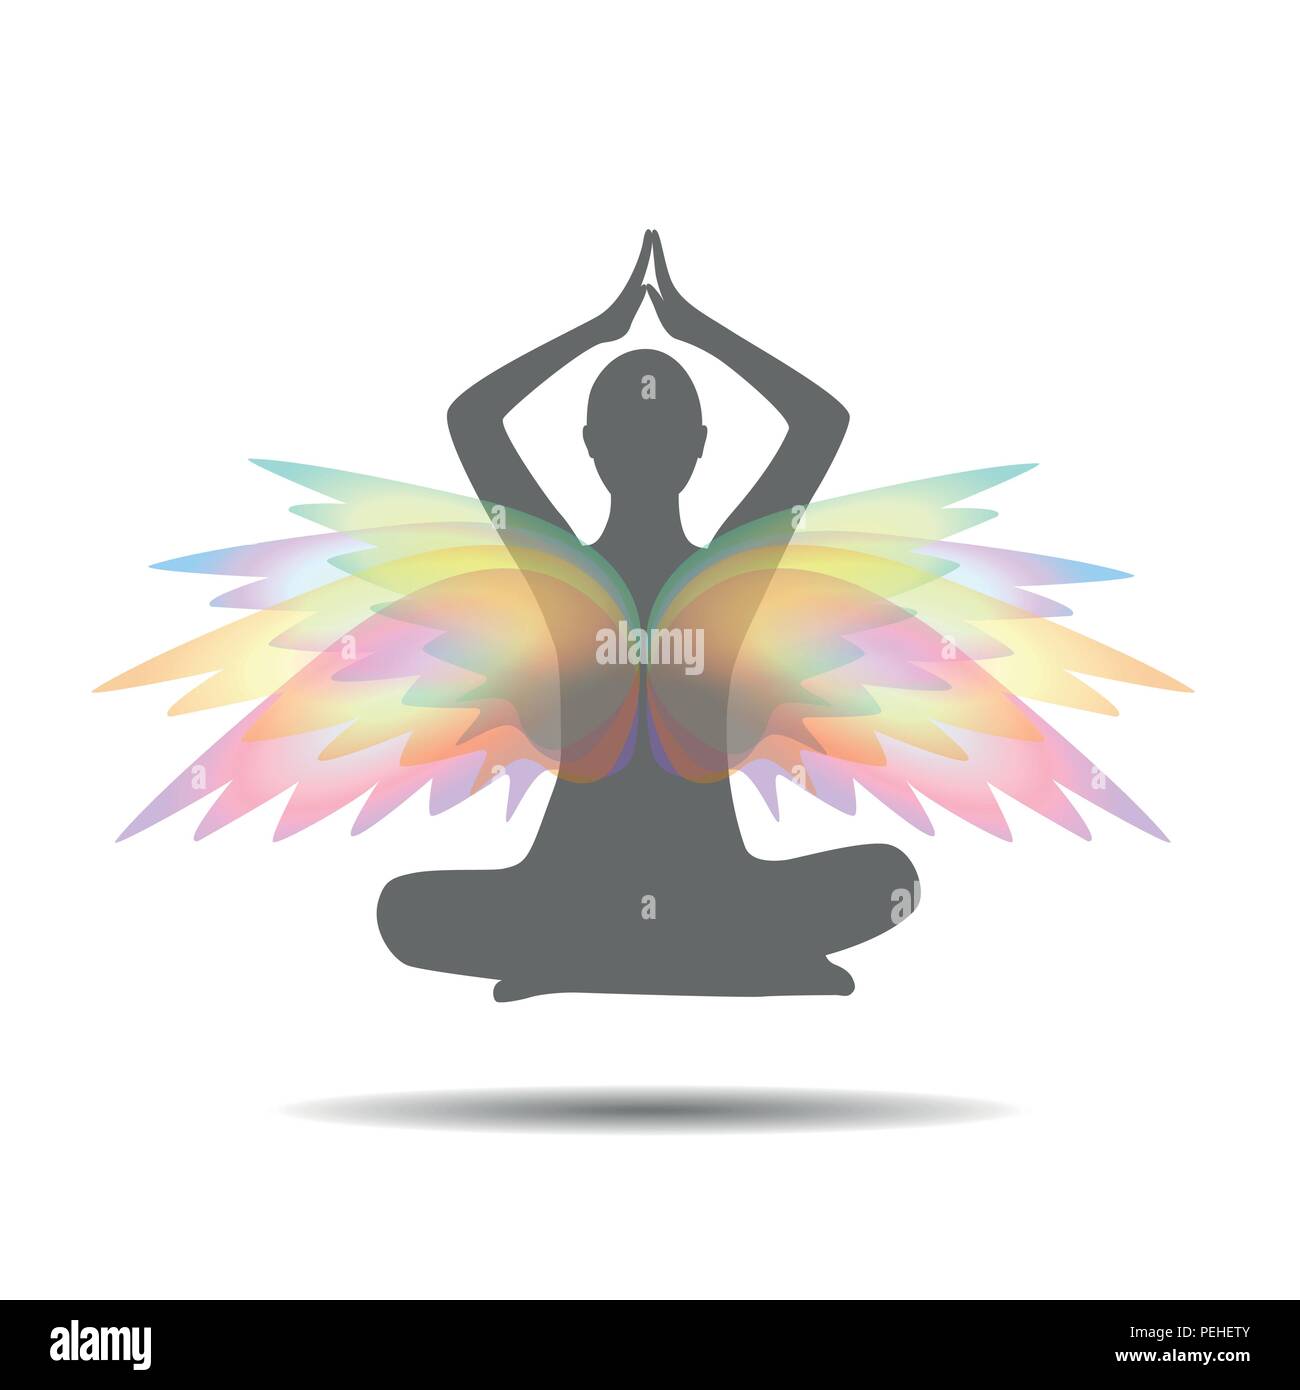 person meditates in a lotus pose with colorful wings vector illustration EPS10 Stock Vector